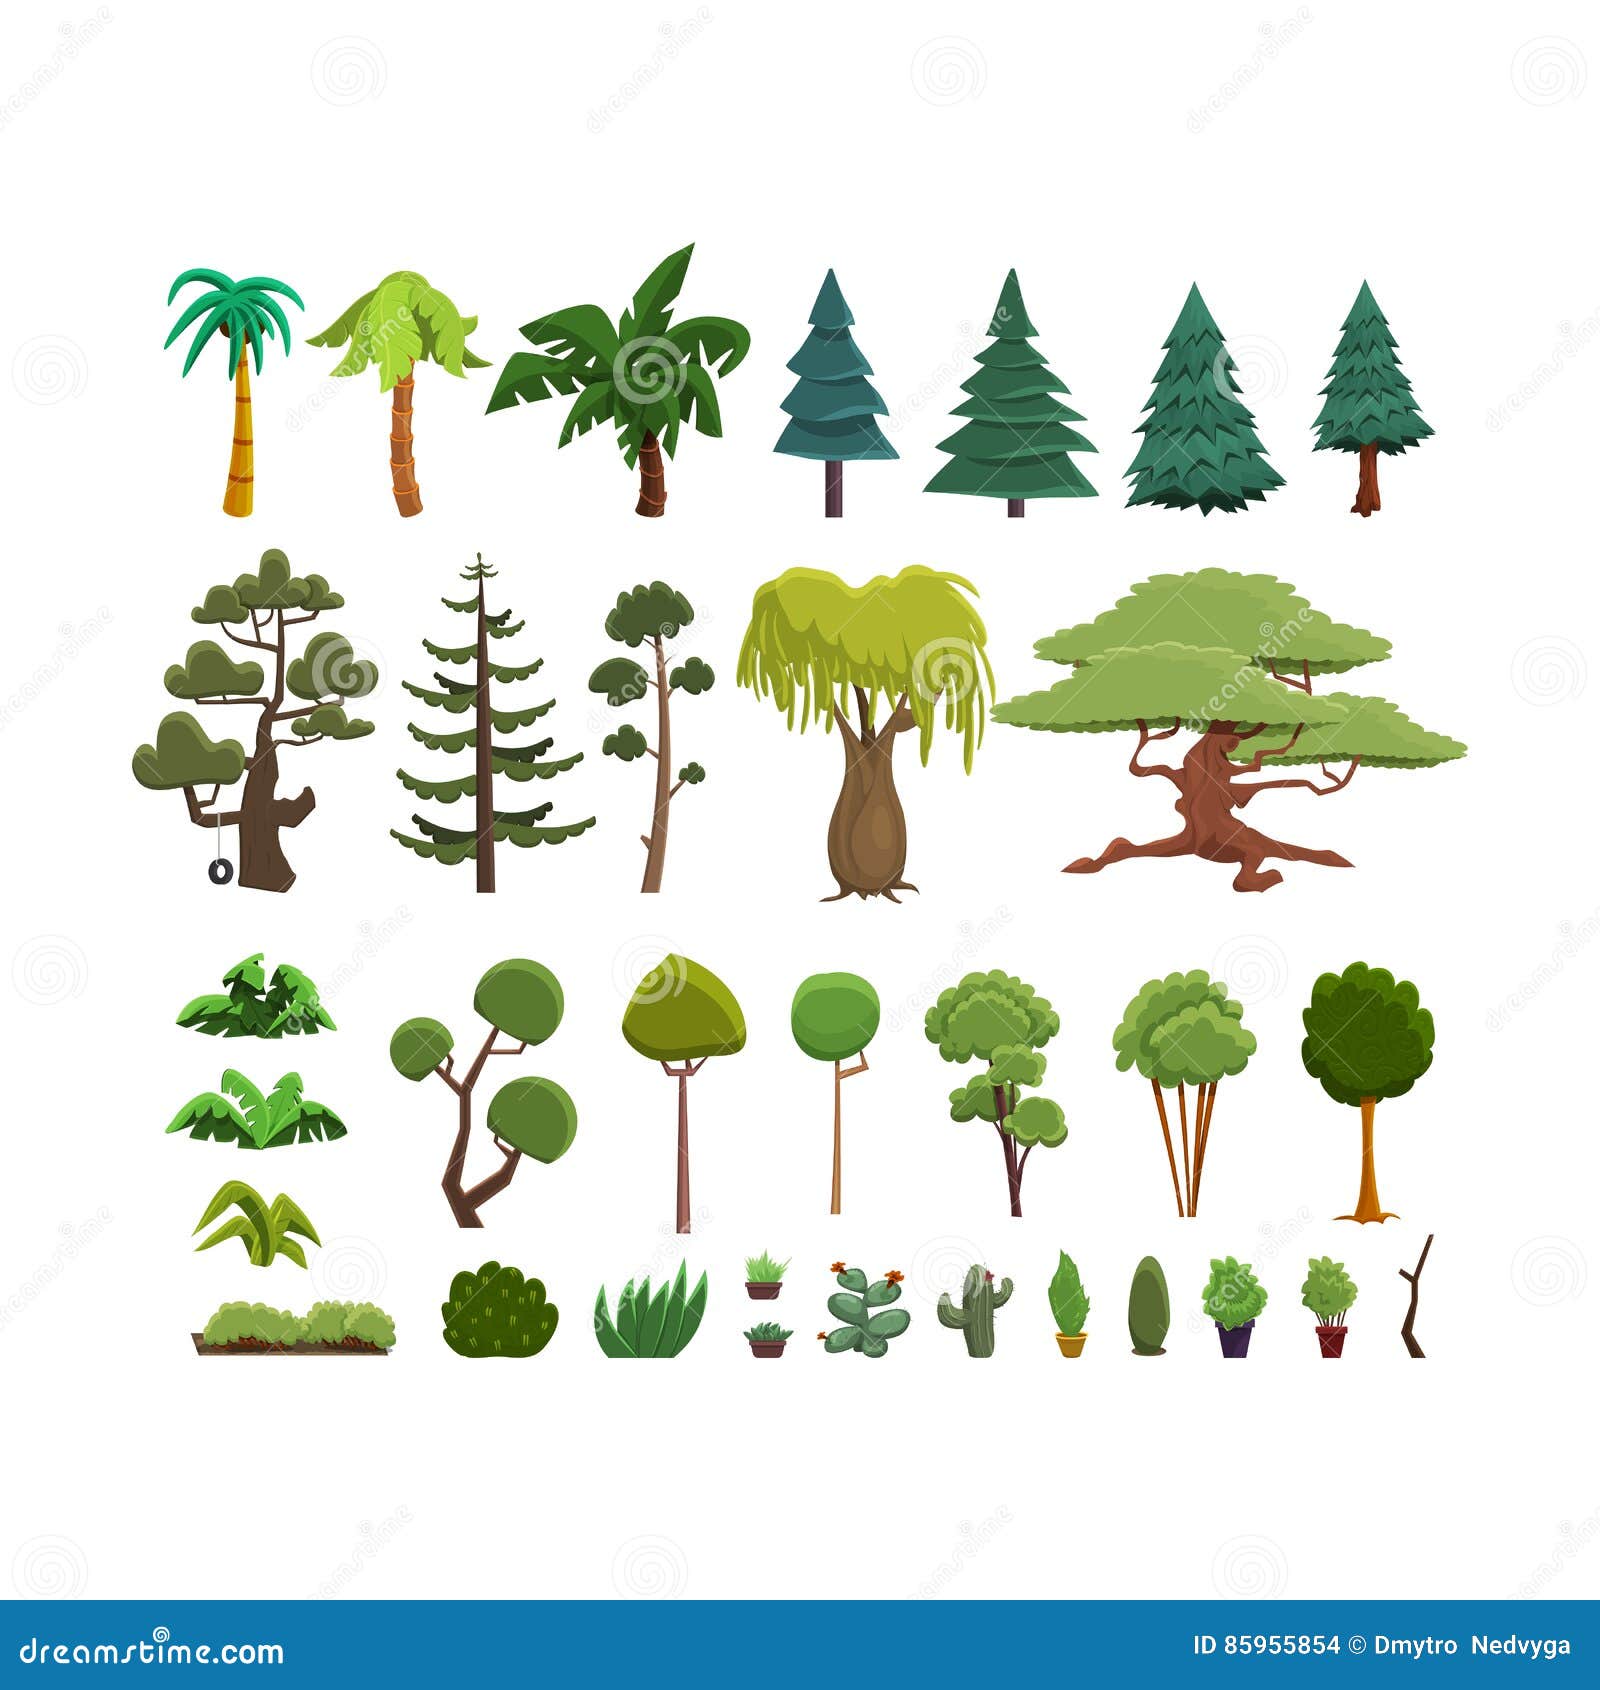 a set of different species of trees and shrubs in a flat style.